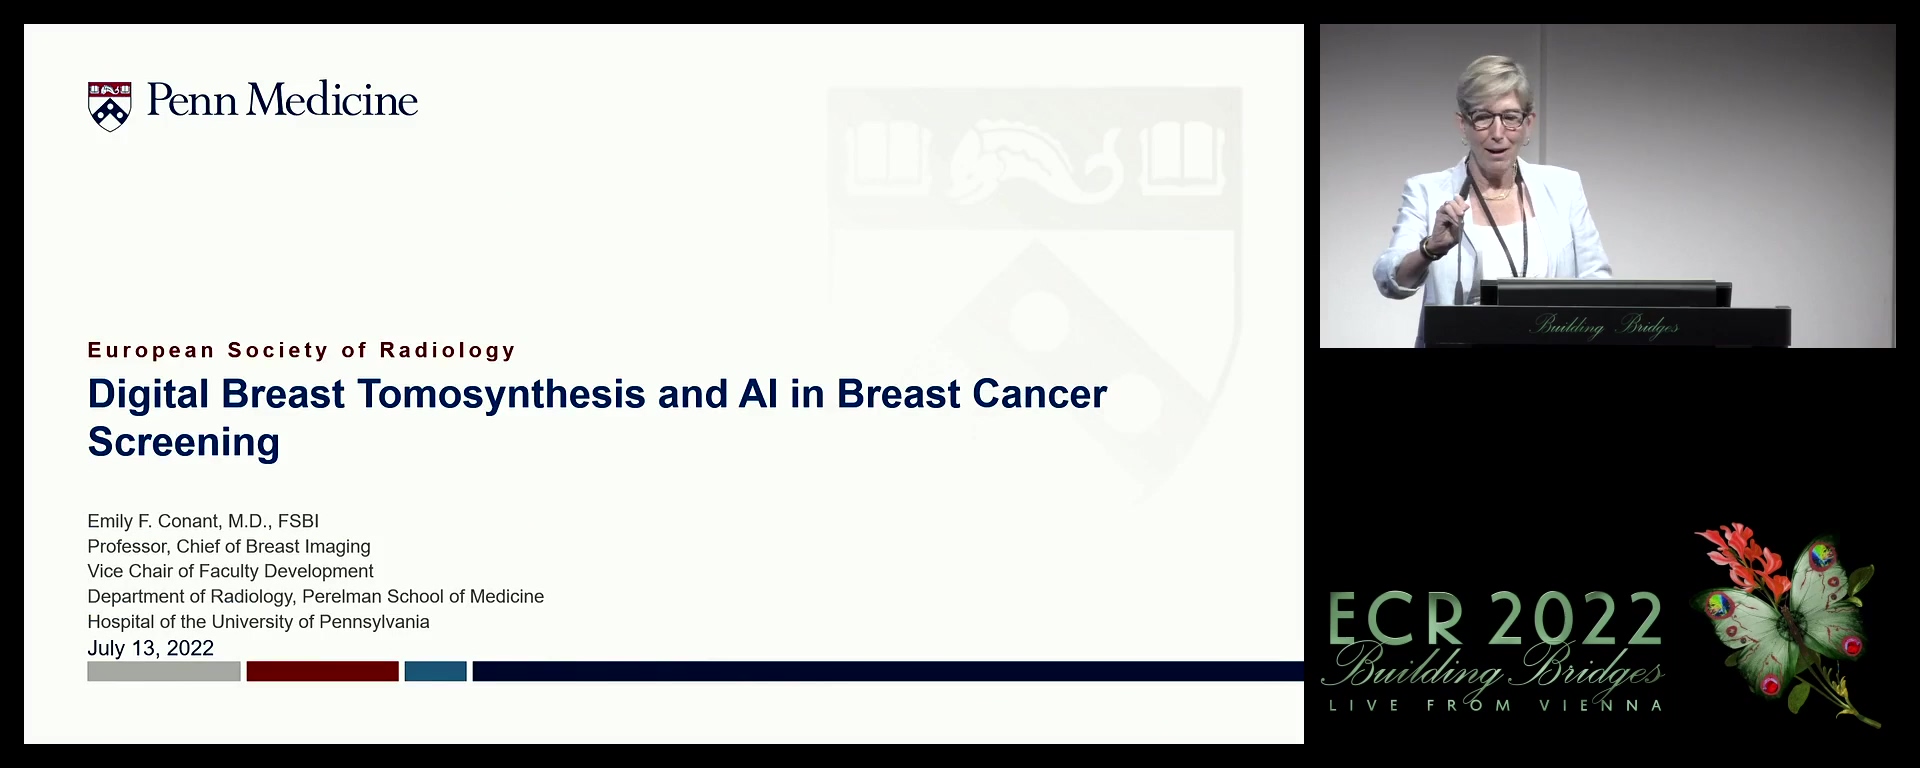 C. Digital breast tomosynthesis and AI in screening